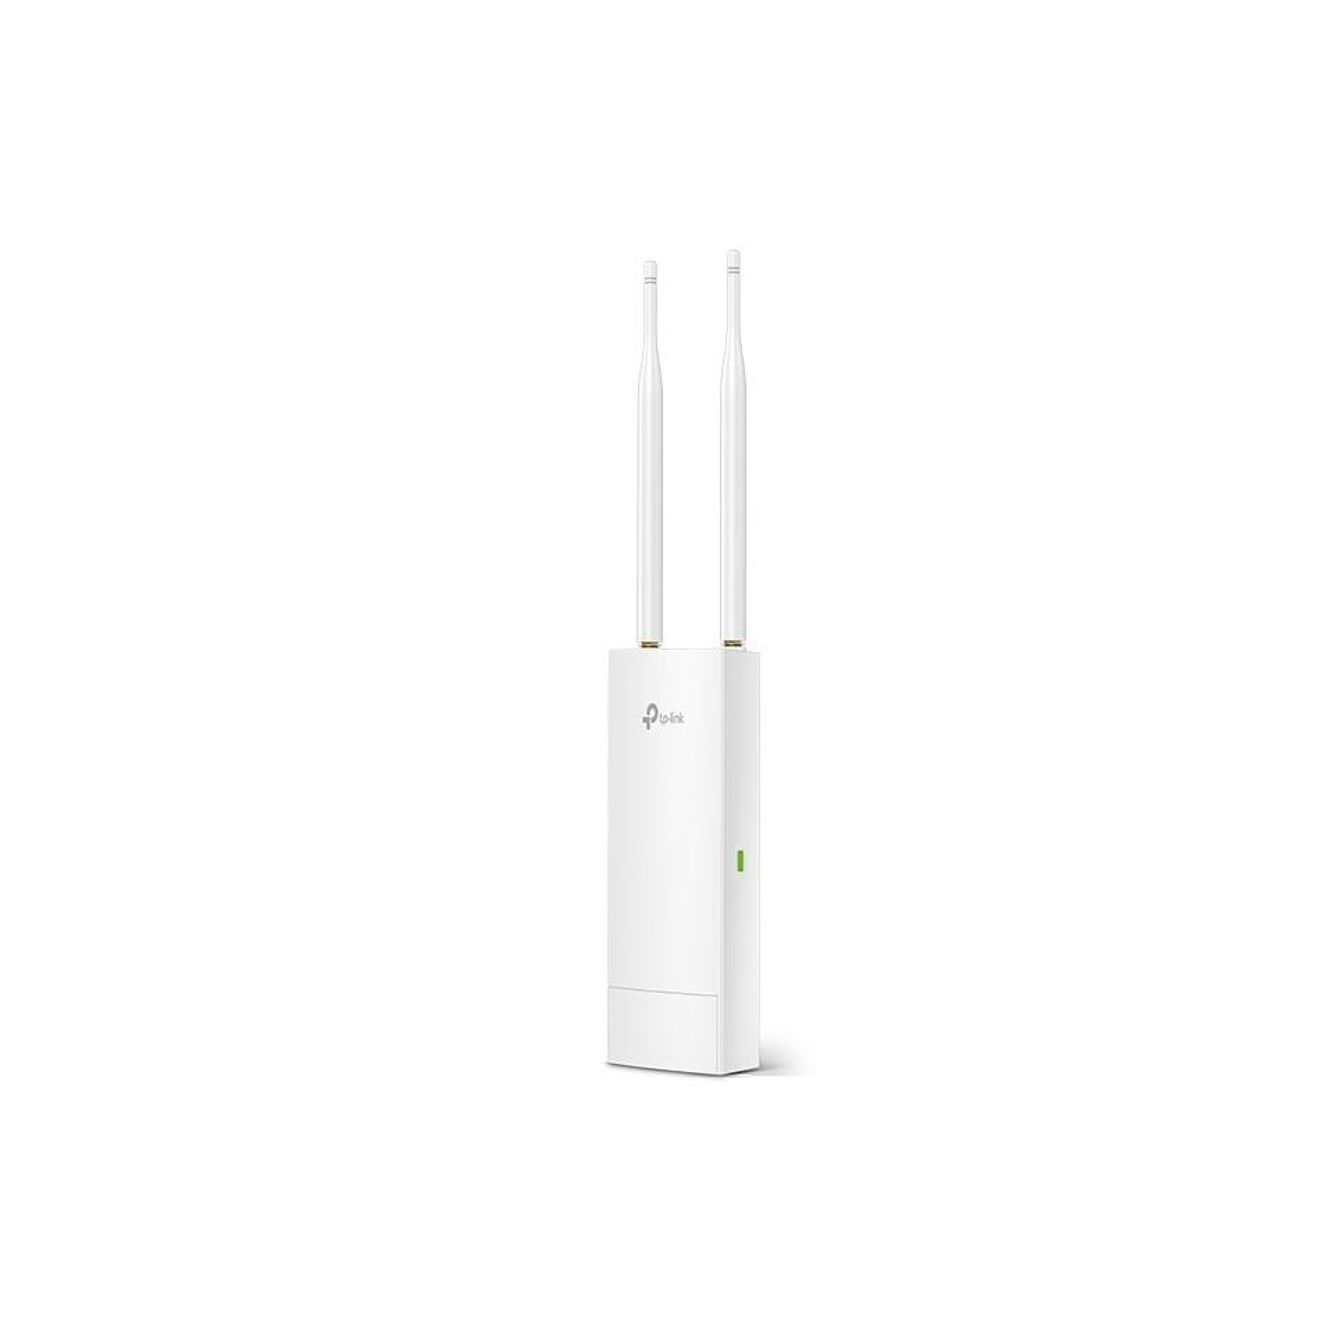 TL-EAP110-OUTDOOR - TP-Link EAP110-Outdoor 300Mbps Wireless N Outdoor Access Point